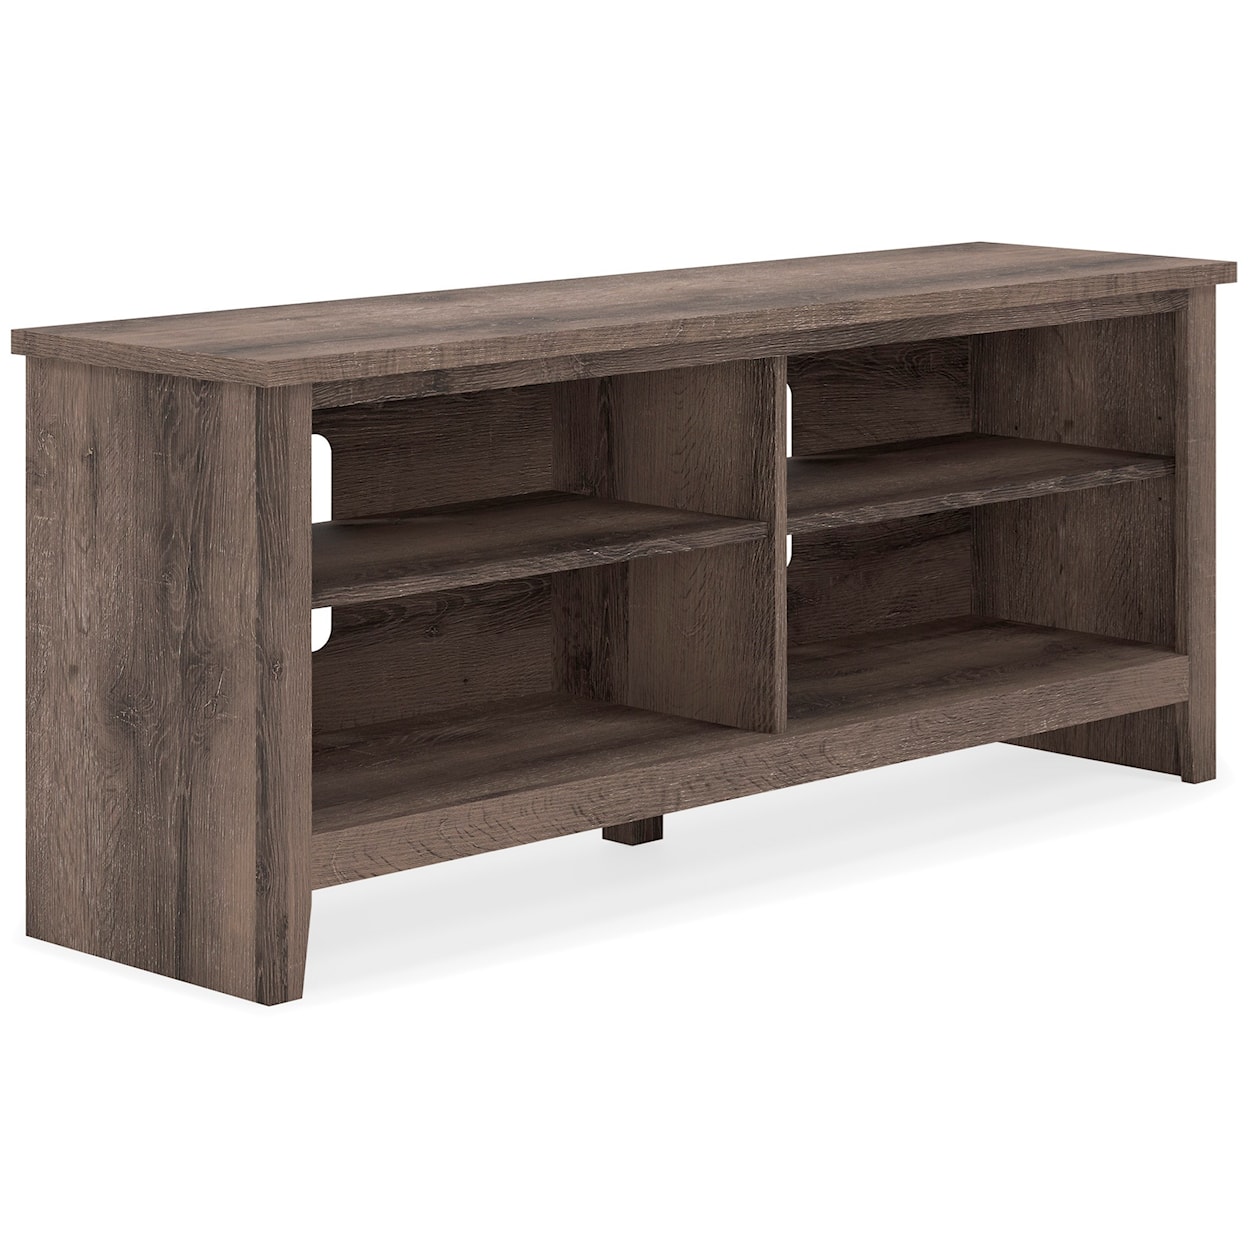 Signature Design by Ashley Arlenbry 58" TV Stand